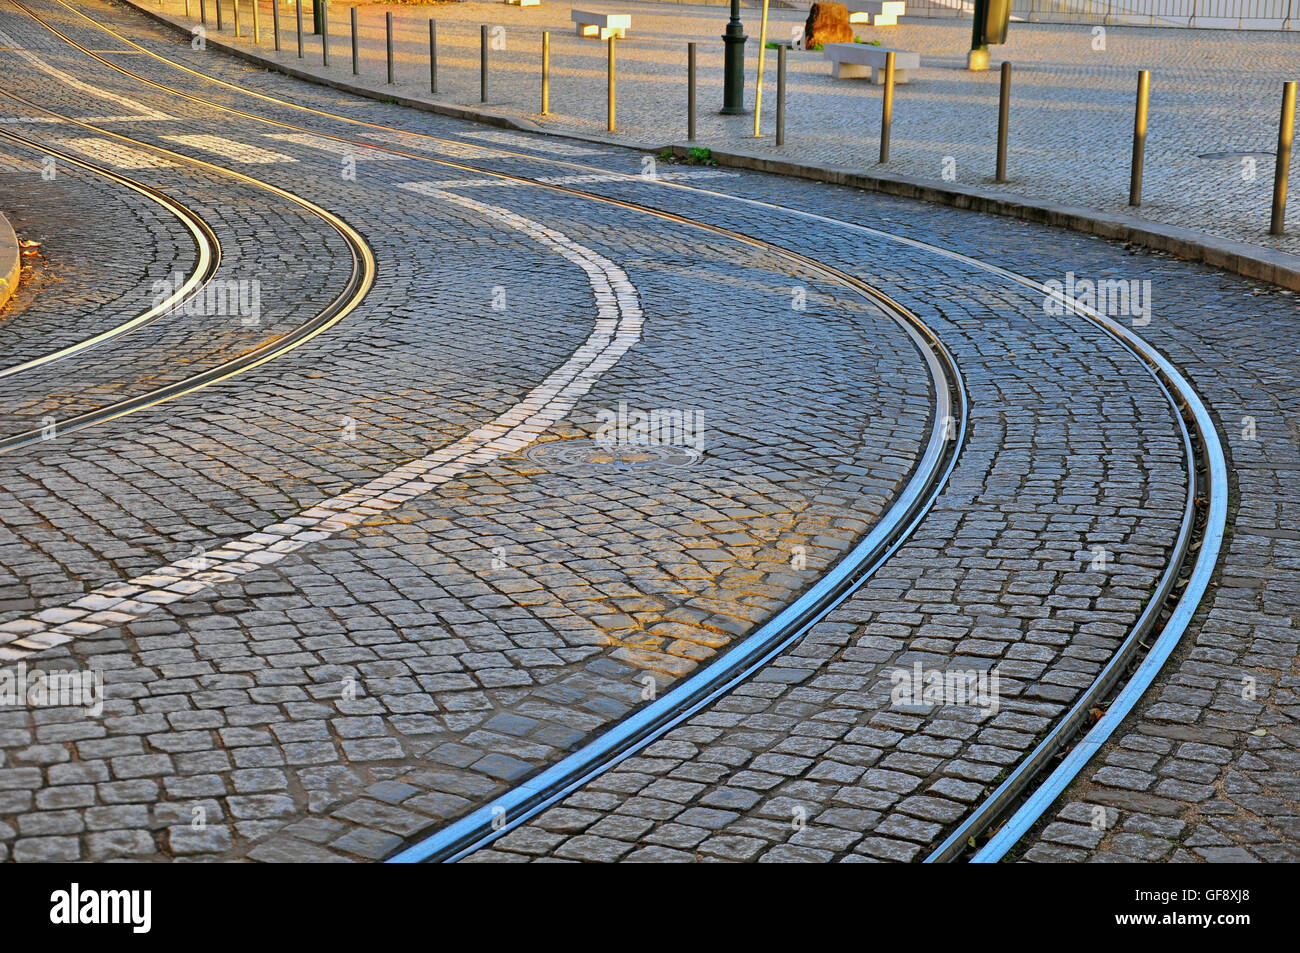 Winding road with tram lines Stock Photo